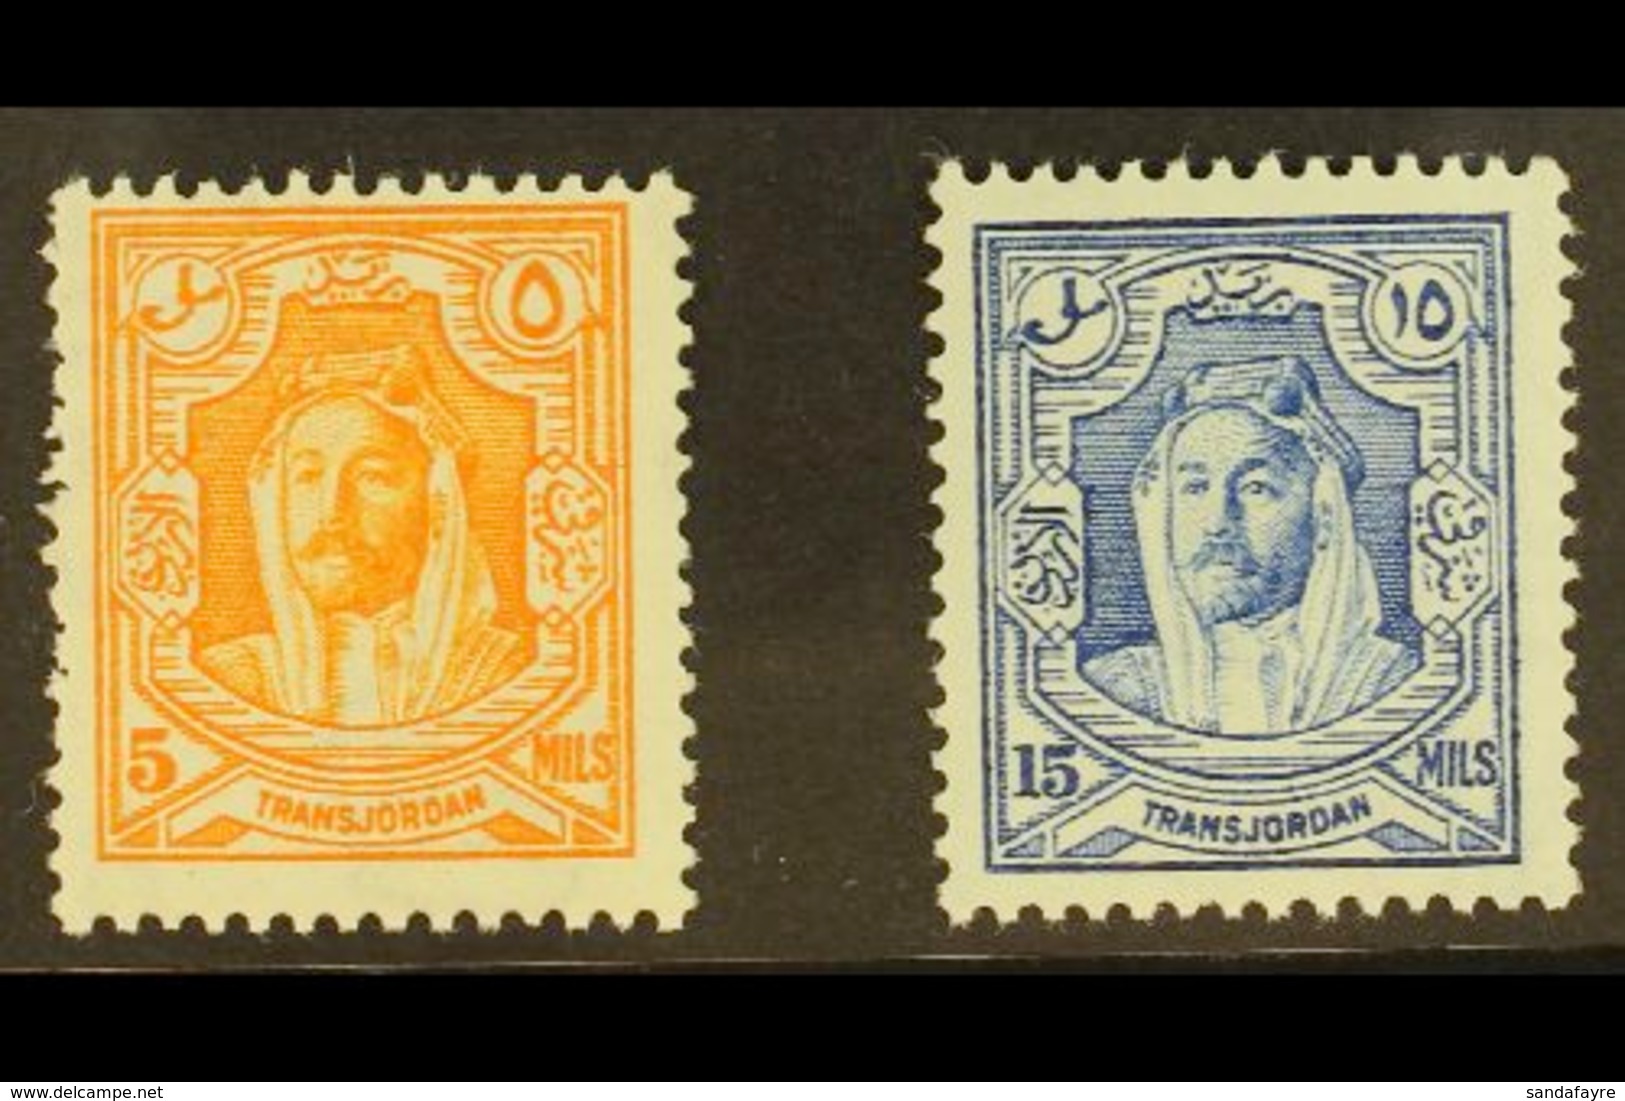 1930 5m Orange And 15m Ultramarine Perf 13½ X 14 Coil Stamps, SG 198a, 200a, Very Fine Mint. (2 Stamps) For More Images, - Giordania